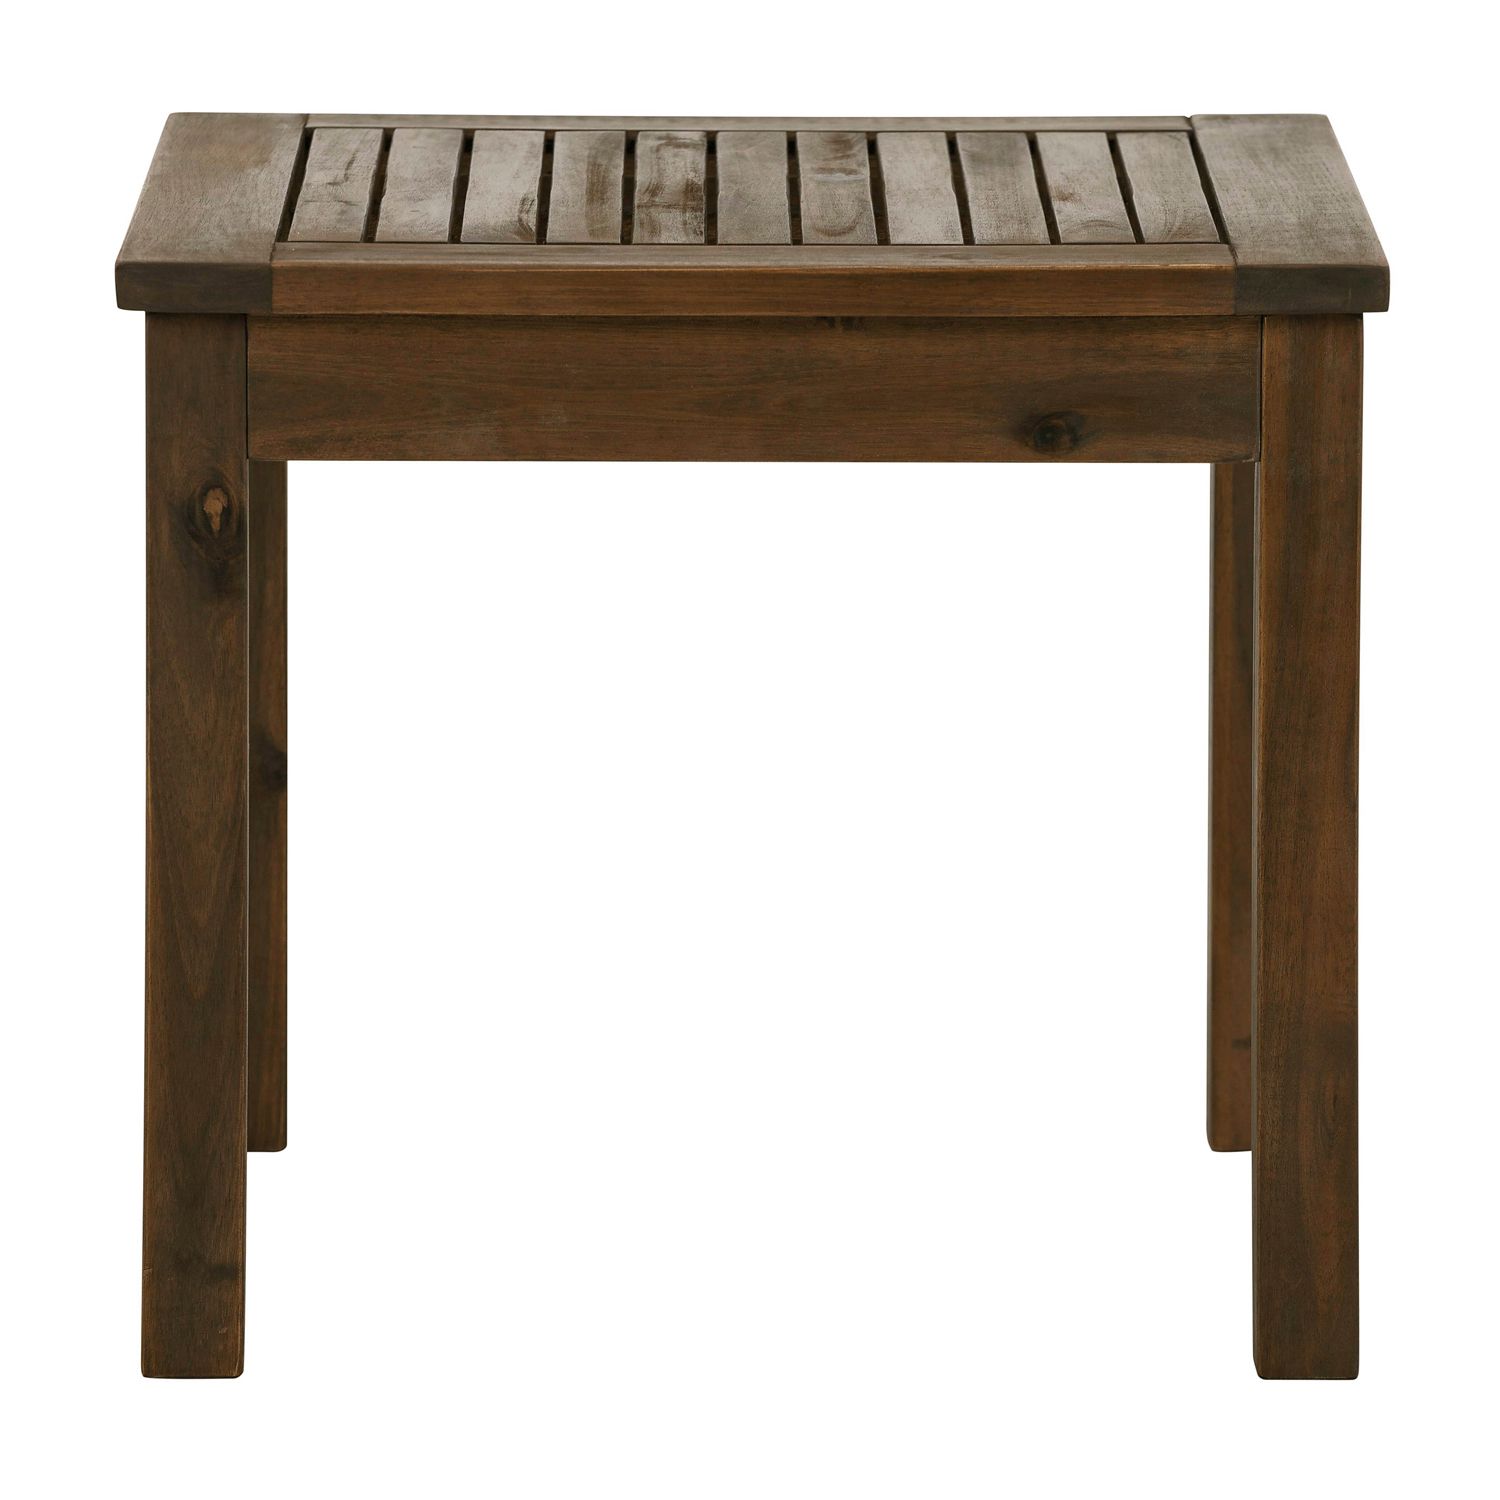 Classic Acacia Wood Patio Side Table – Pier1 Imports In Natural Dark Oil Acacia Outdoor Arm Chairs (View 9 of 15)